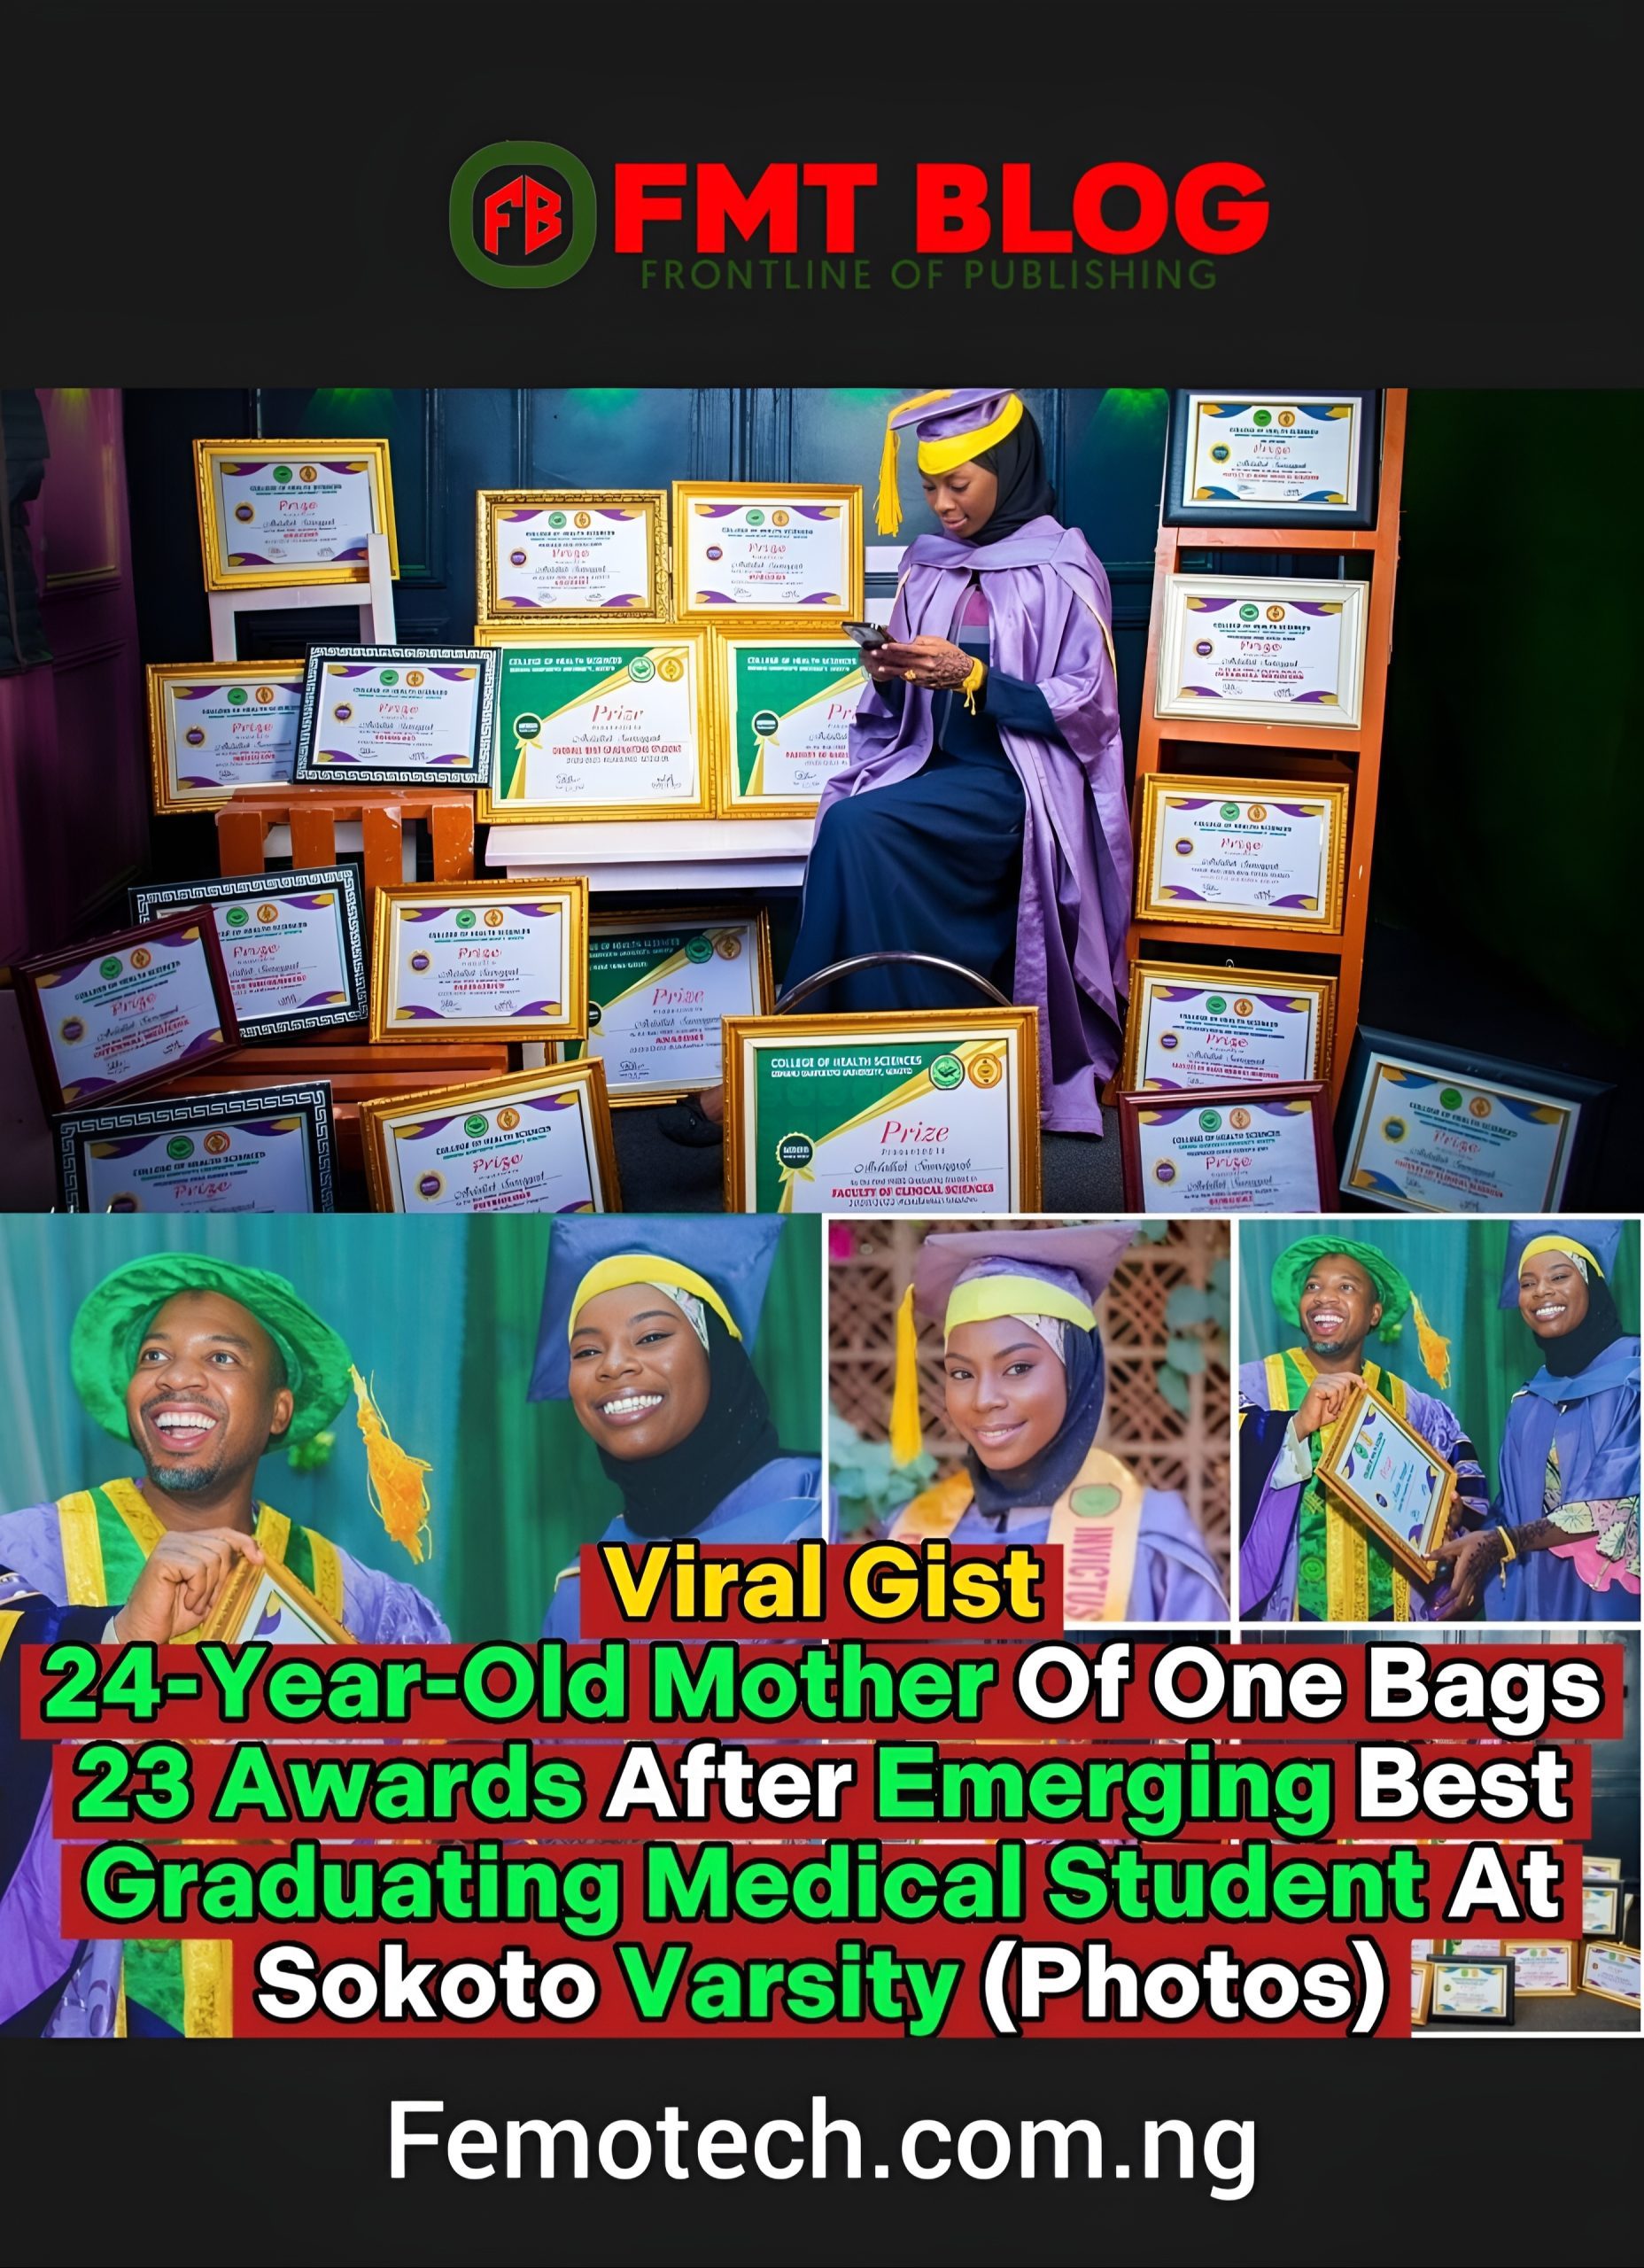 24-Year-Old Mother Of One Bags 23 Awards After Emerging Best Graduating Medical Student At Sokoto Varsity (PHOTOS)